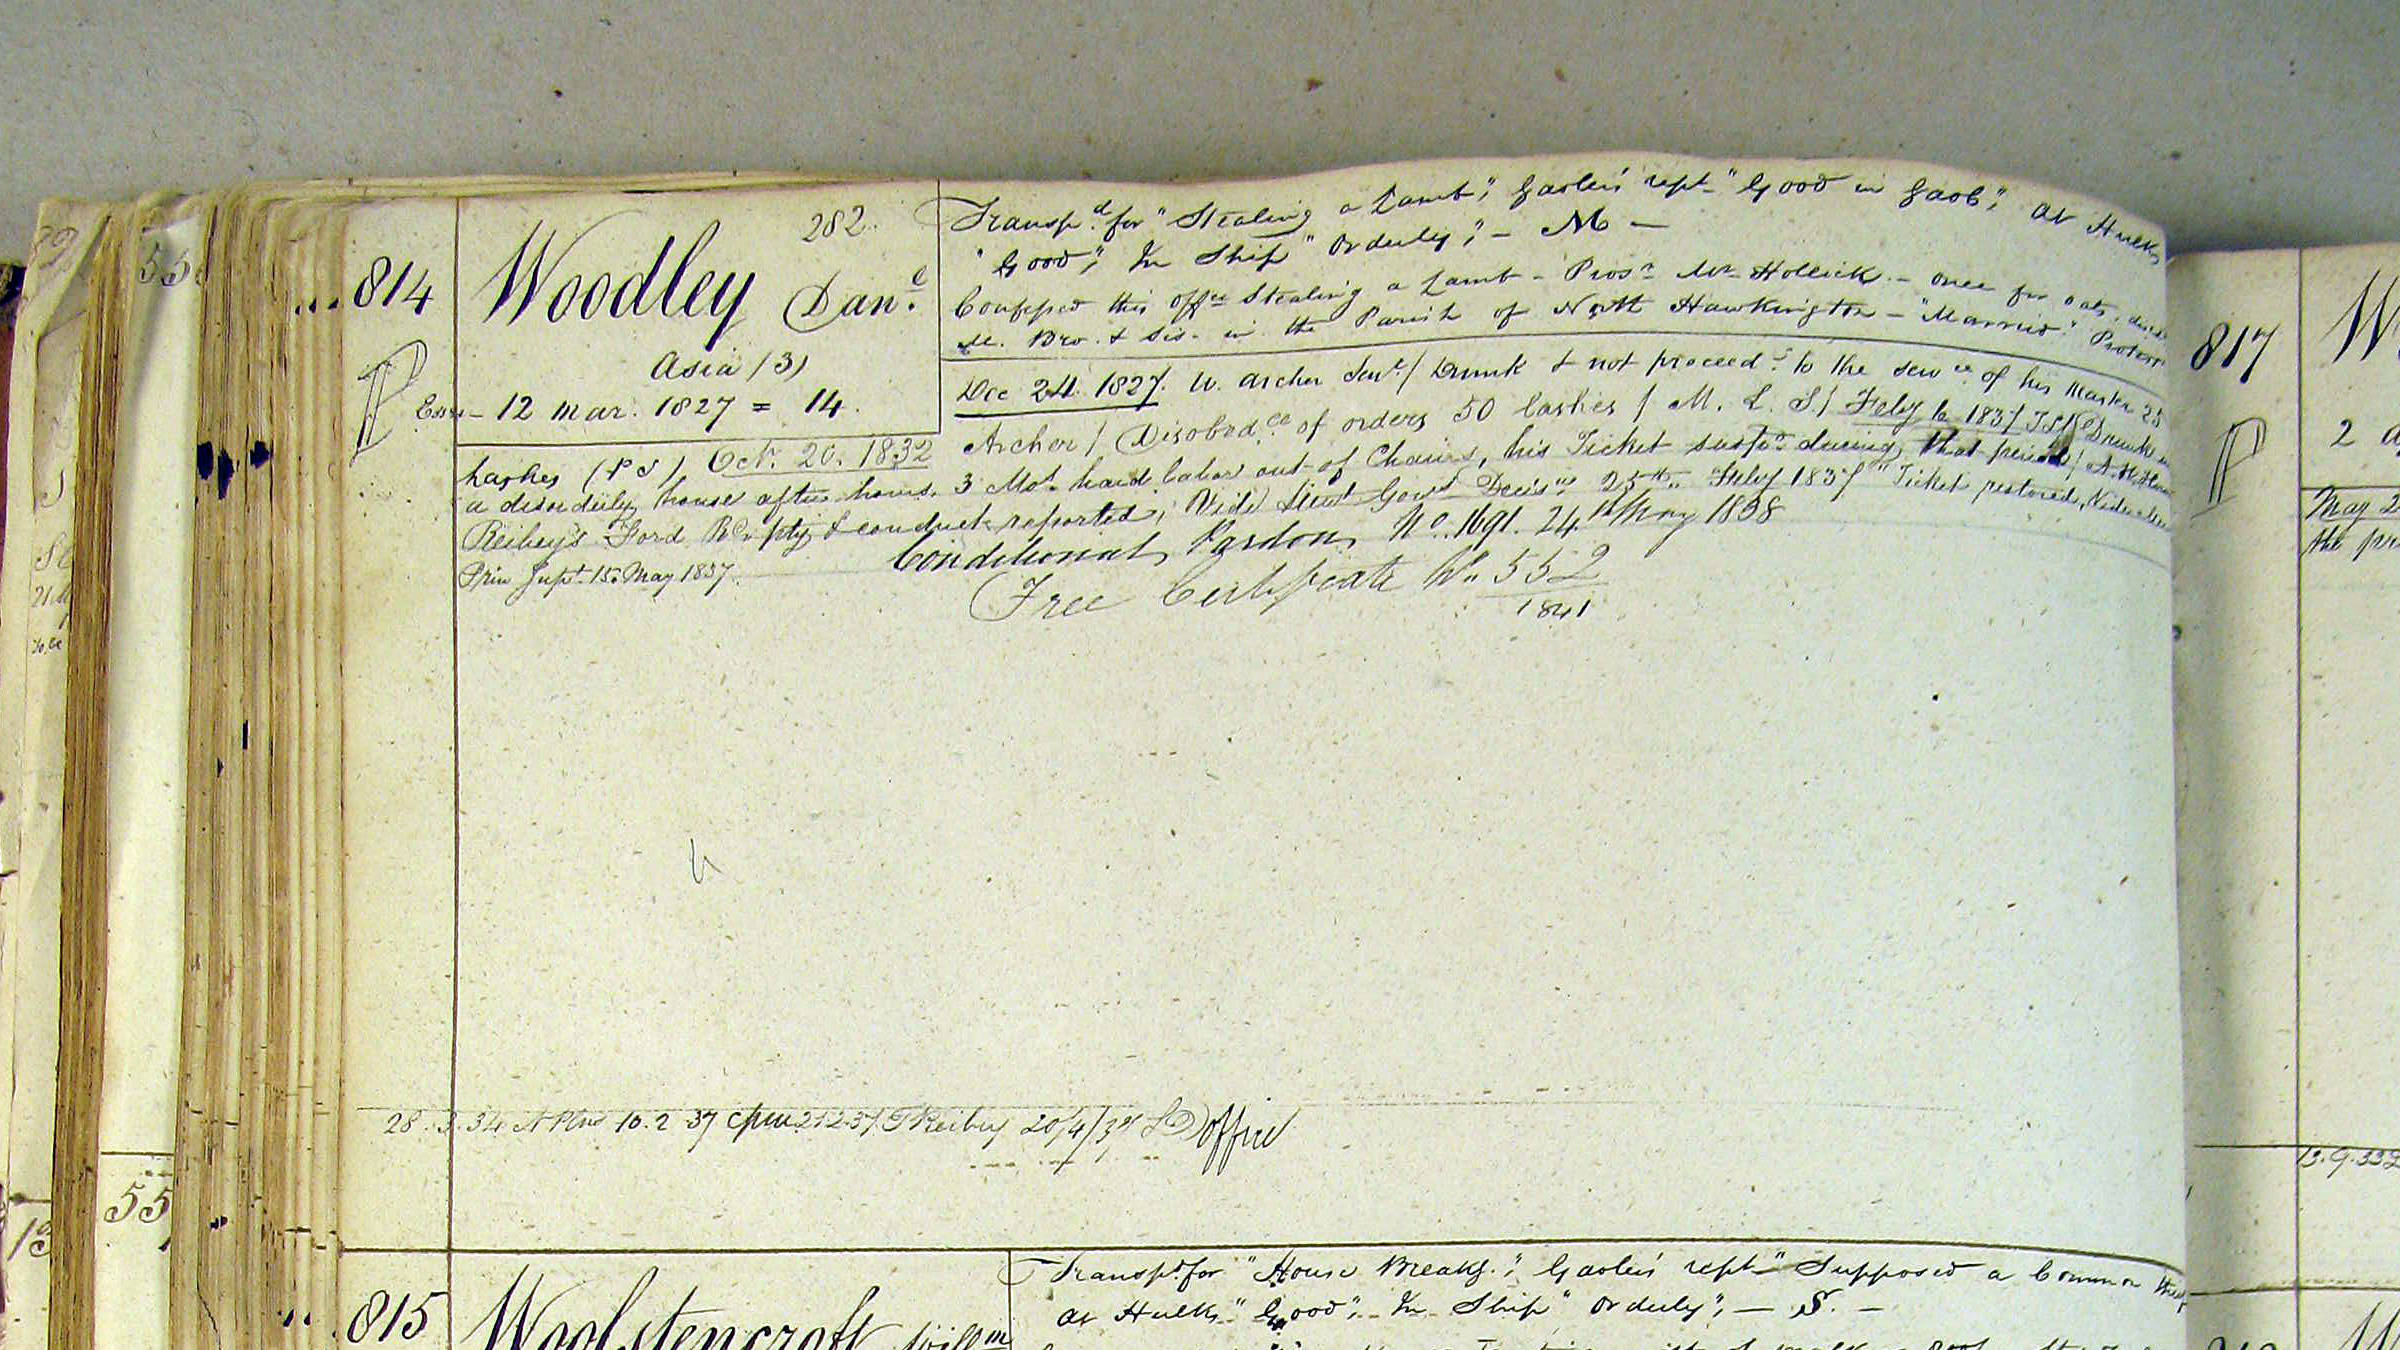 Excerpt from ledgers held as part of Brickendon Estate’s archives mentioning Daniel Woodley.